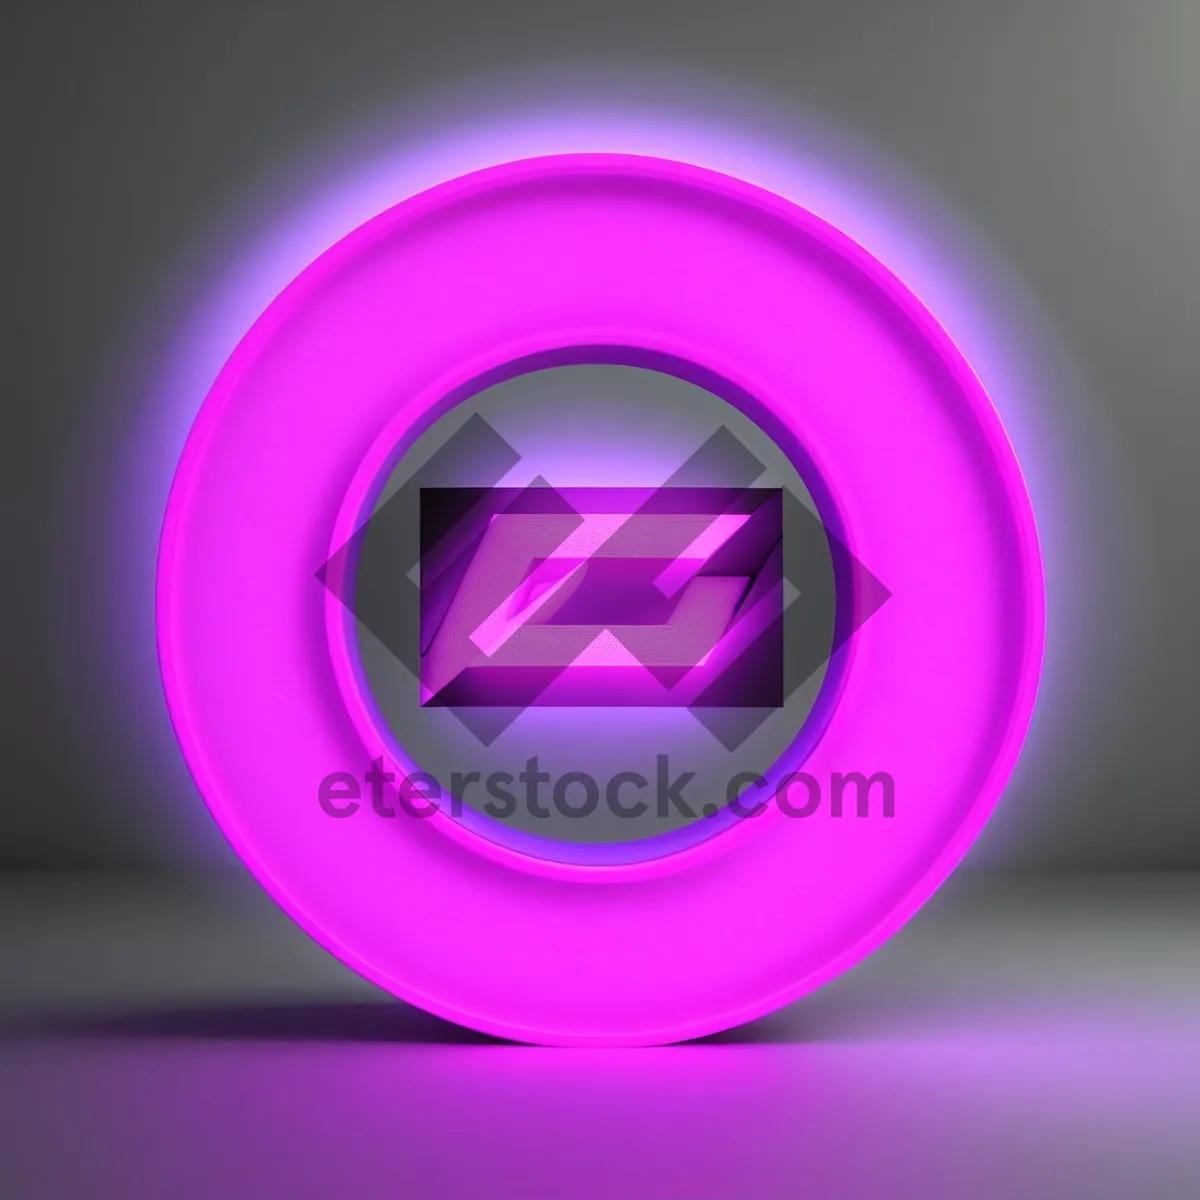 Picture of Shiny Glass Button Icon: Solid, Circular, Web Design